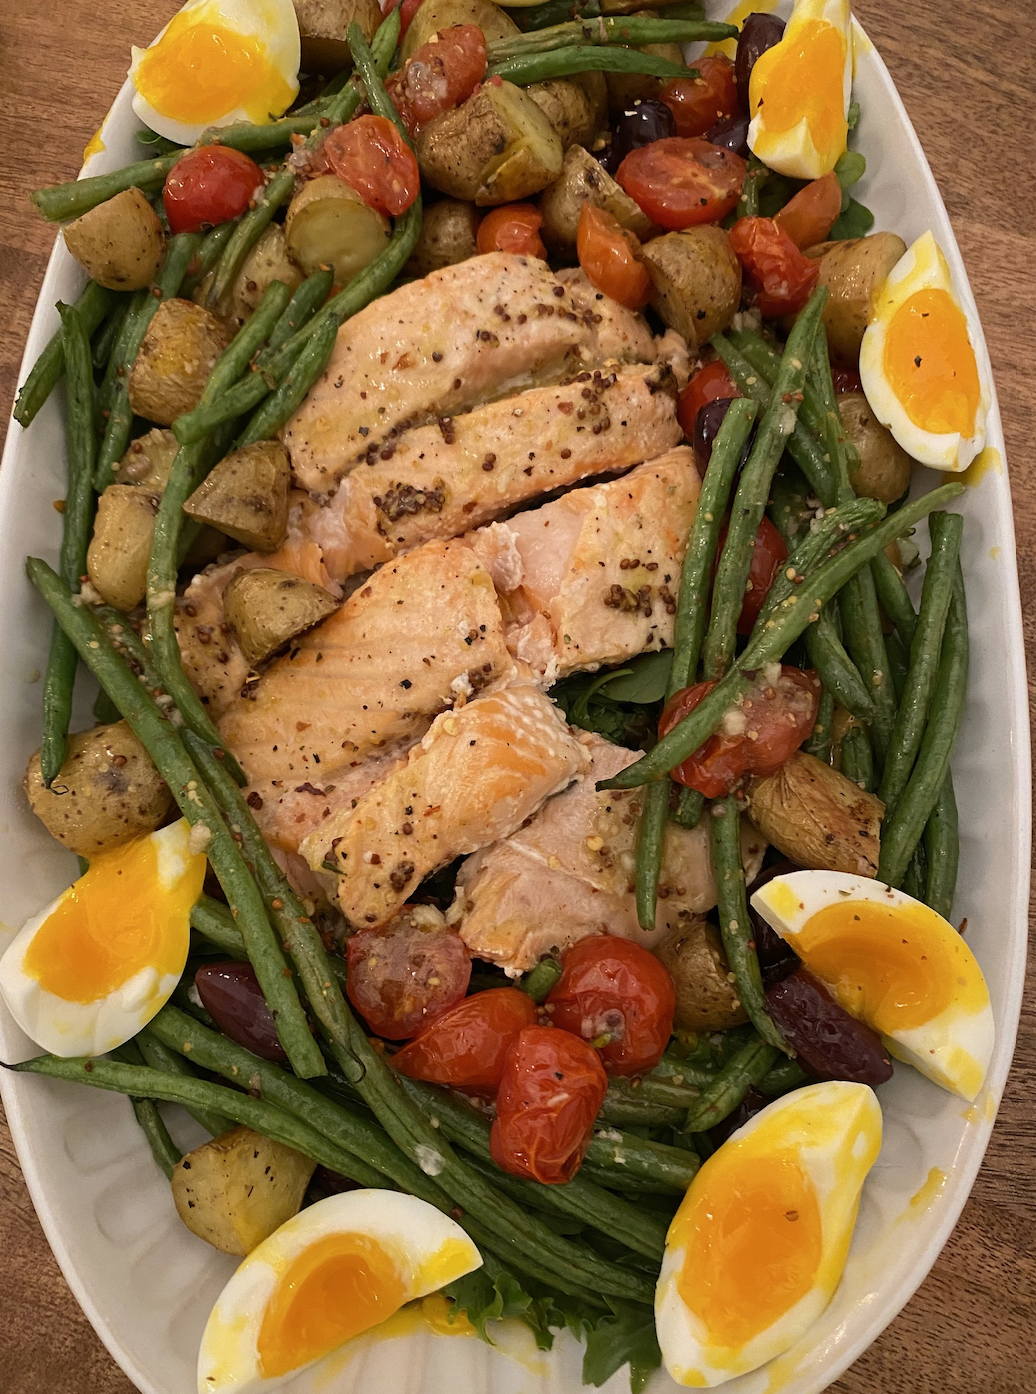 Oval platter of food with salmon, green beans, potatoes, cherry tomatoes, and boiled eggs